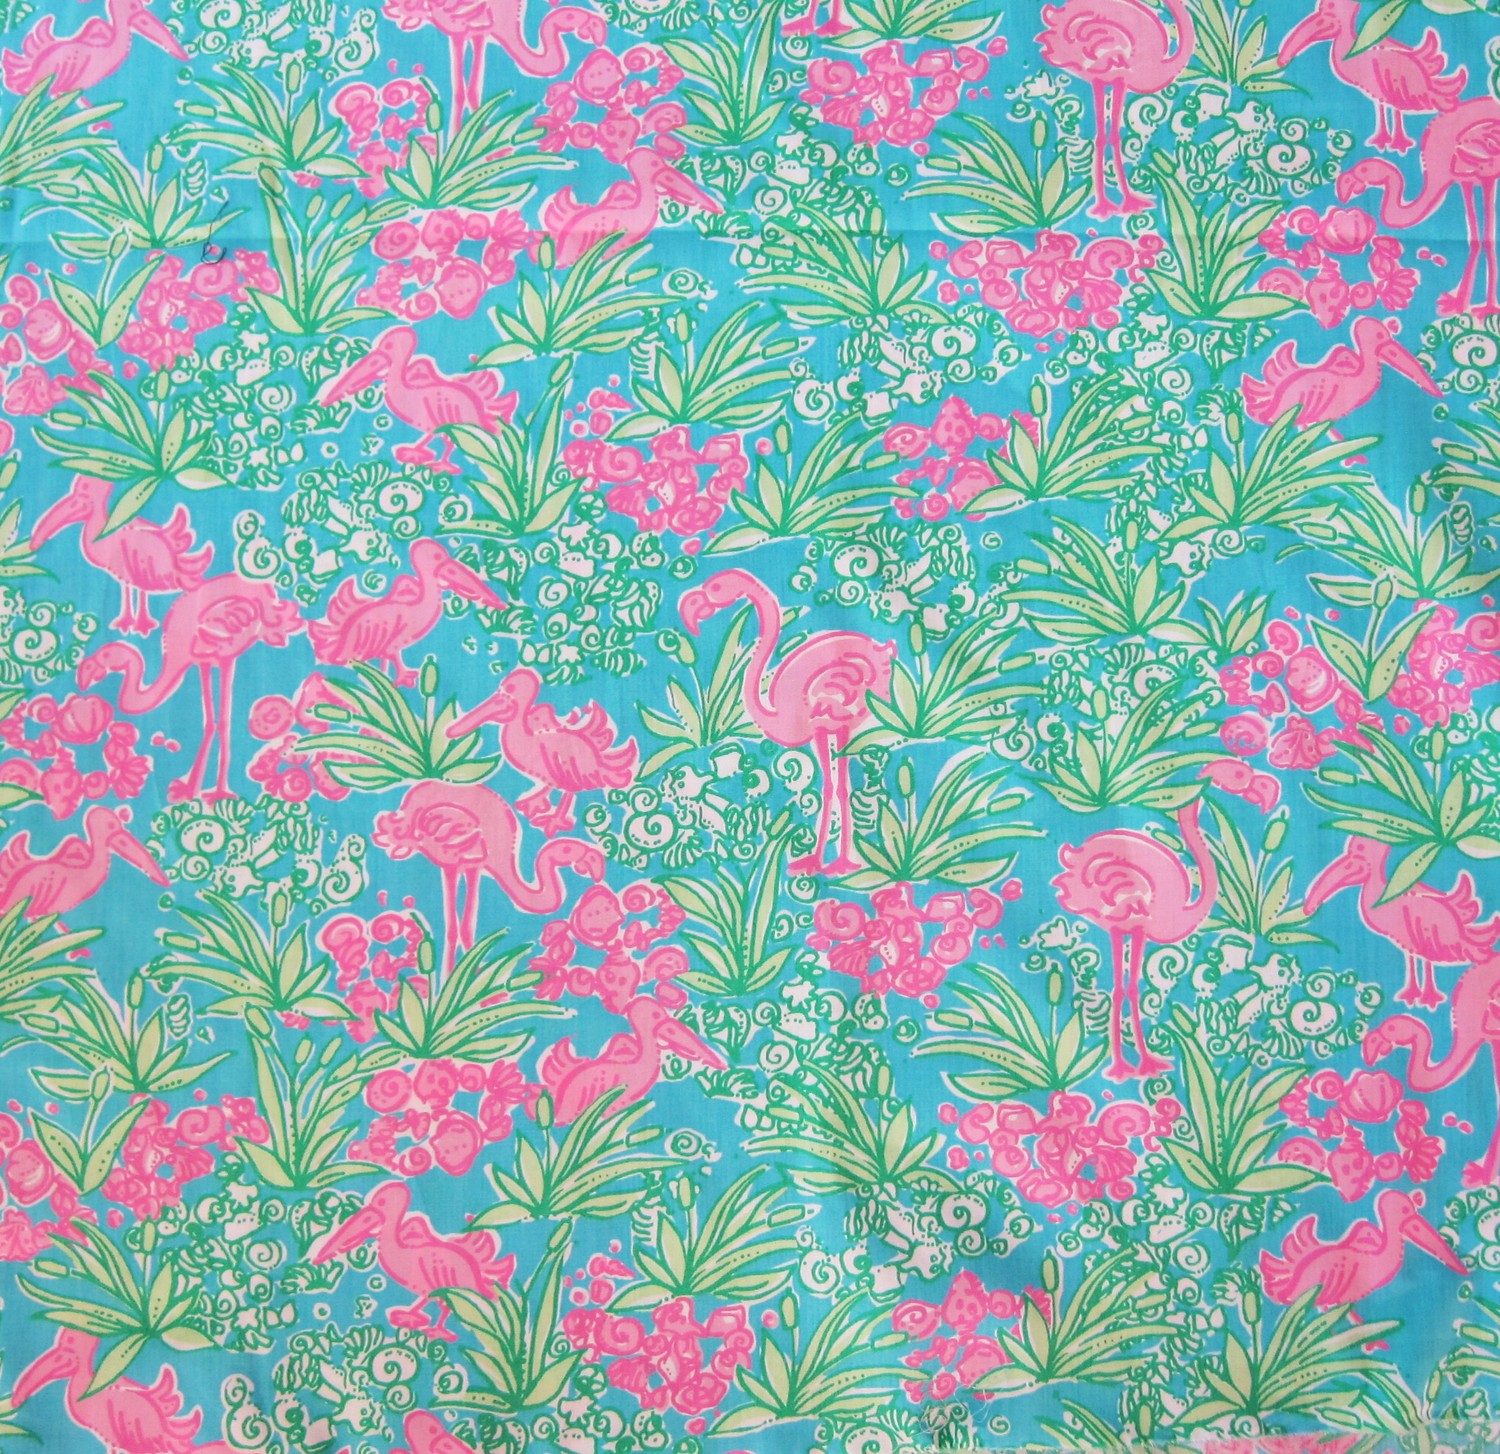 New Lilly Pulitzer Fabric Pattern Albums HD Walls Find Wallpaper